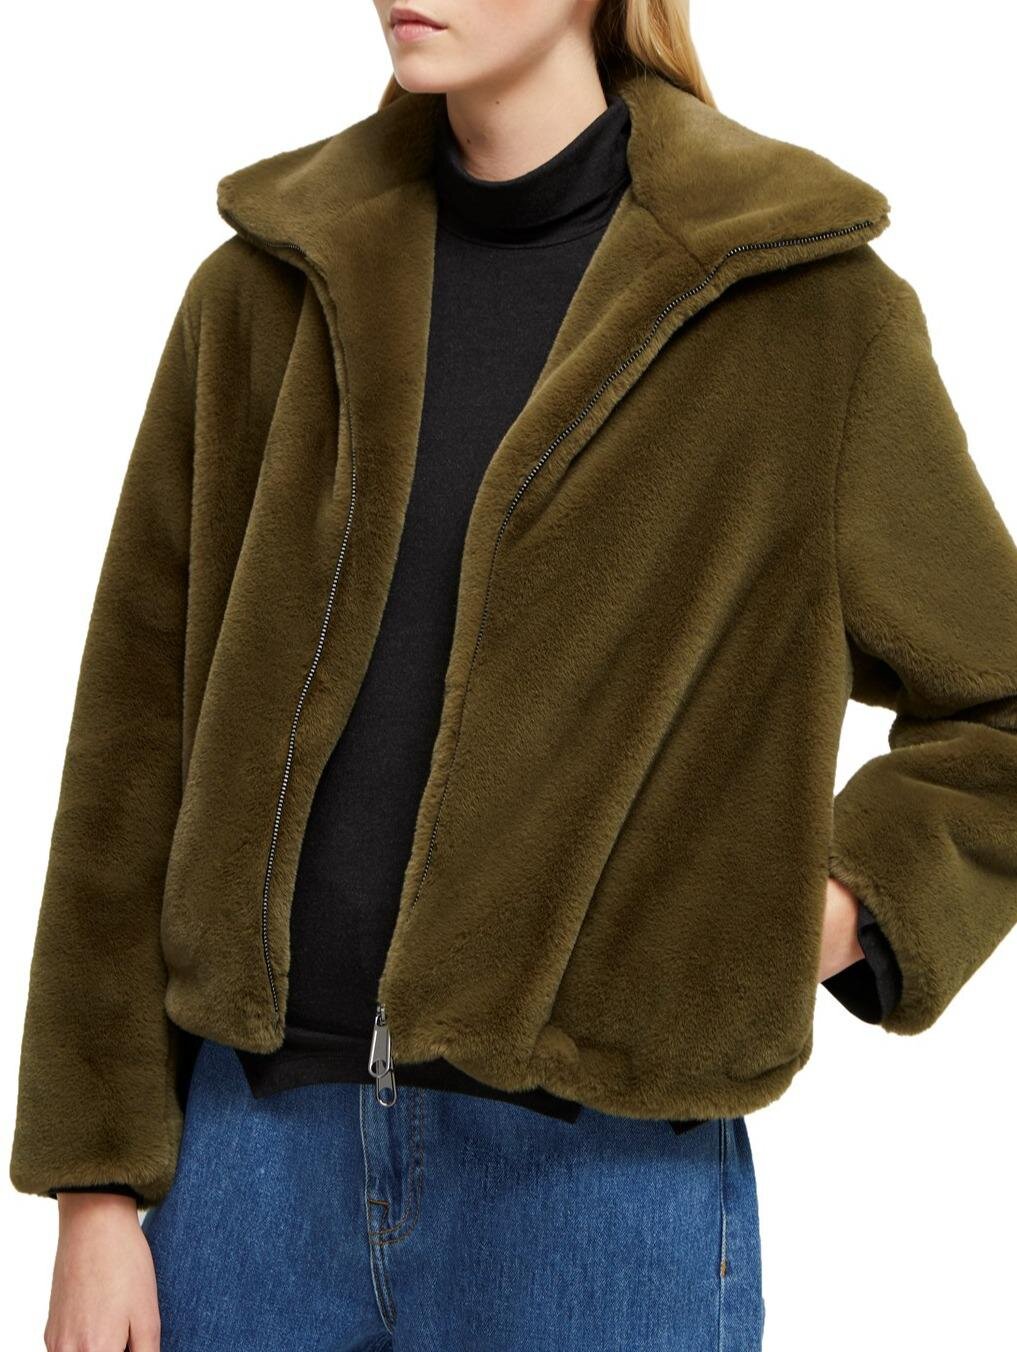 French Connection faux fur jacket.jpg